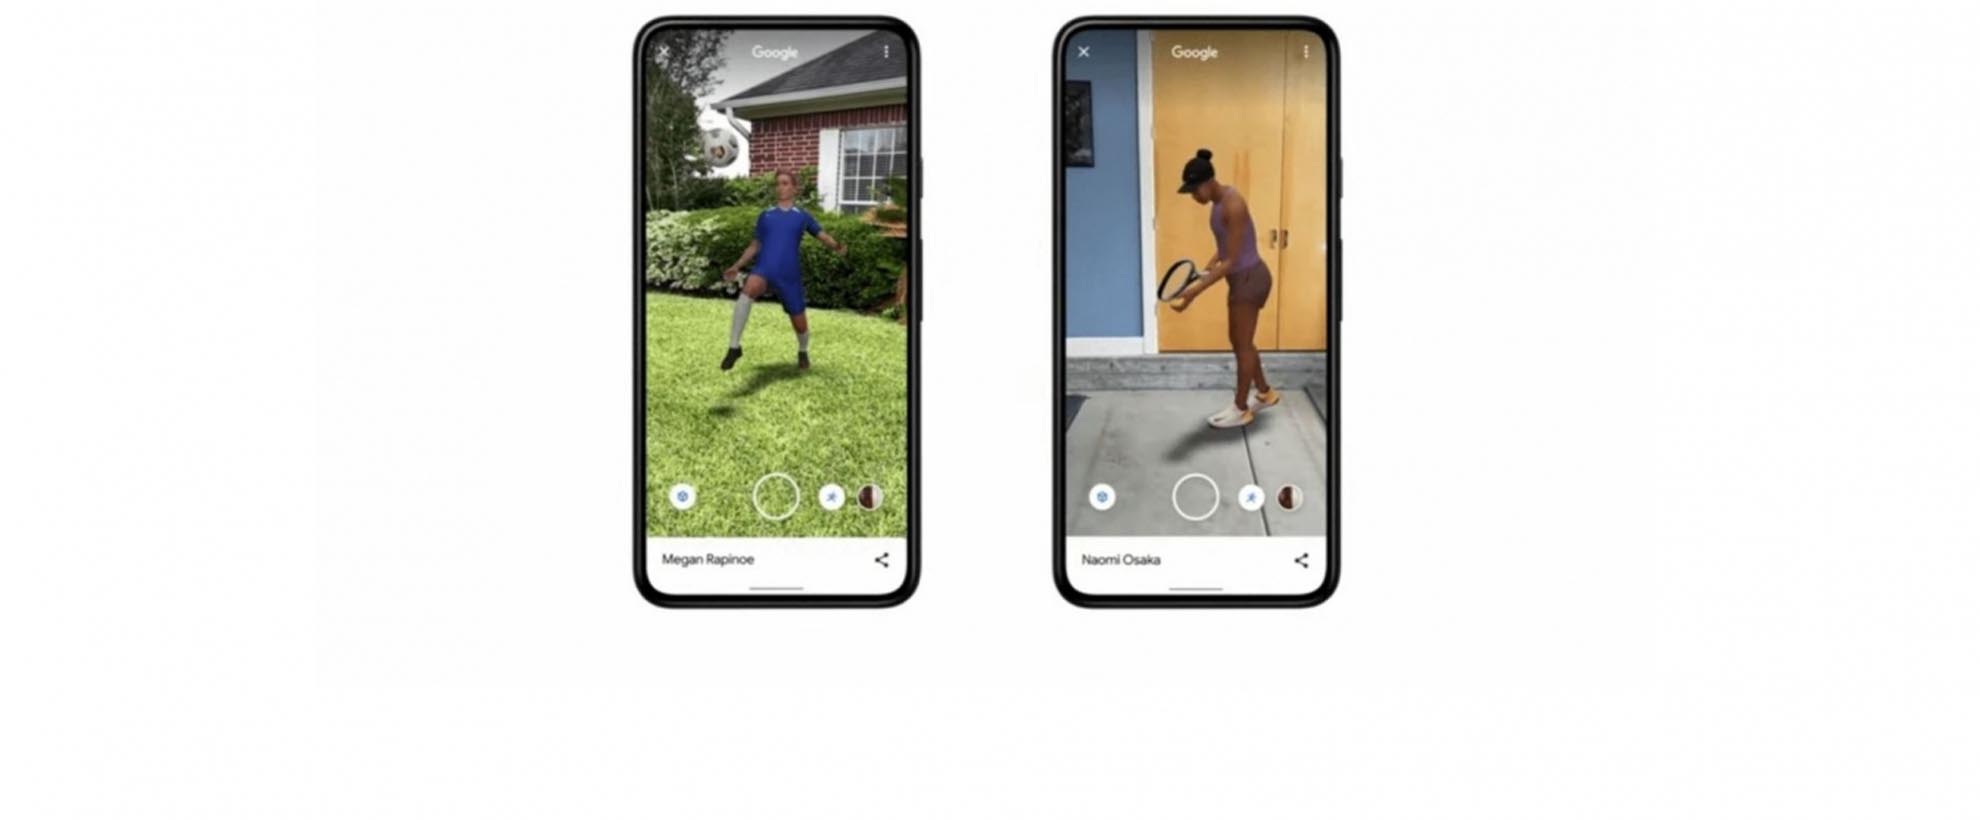 Two smartphones show off two different virtual athletes, one playing soccer, and one playing tennis